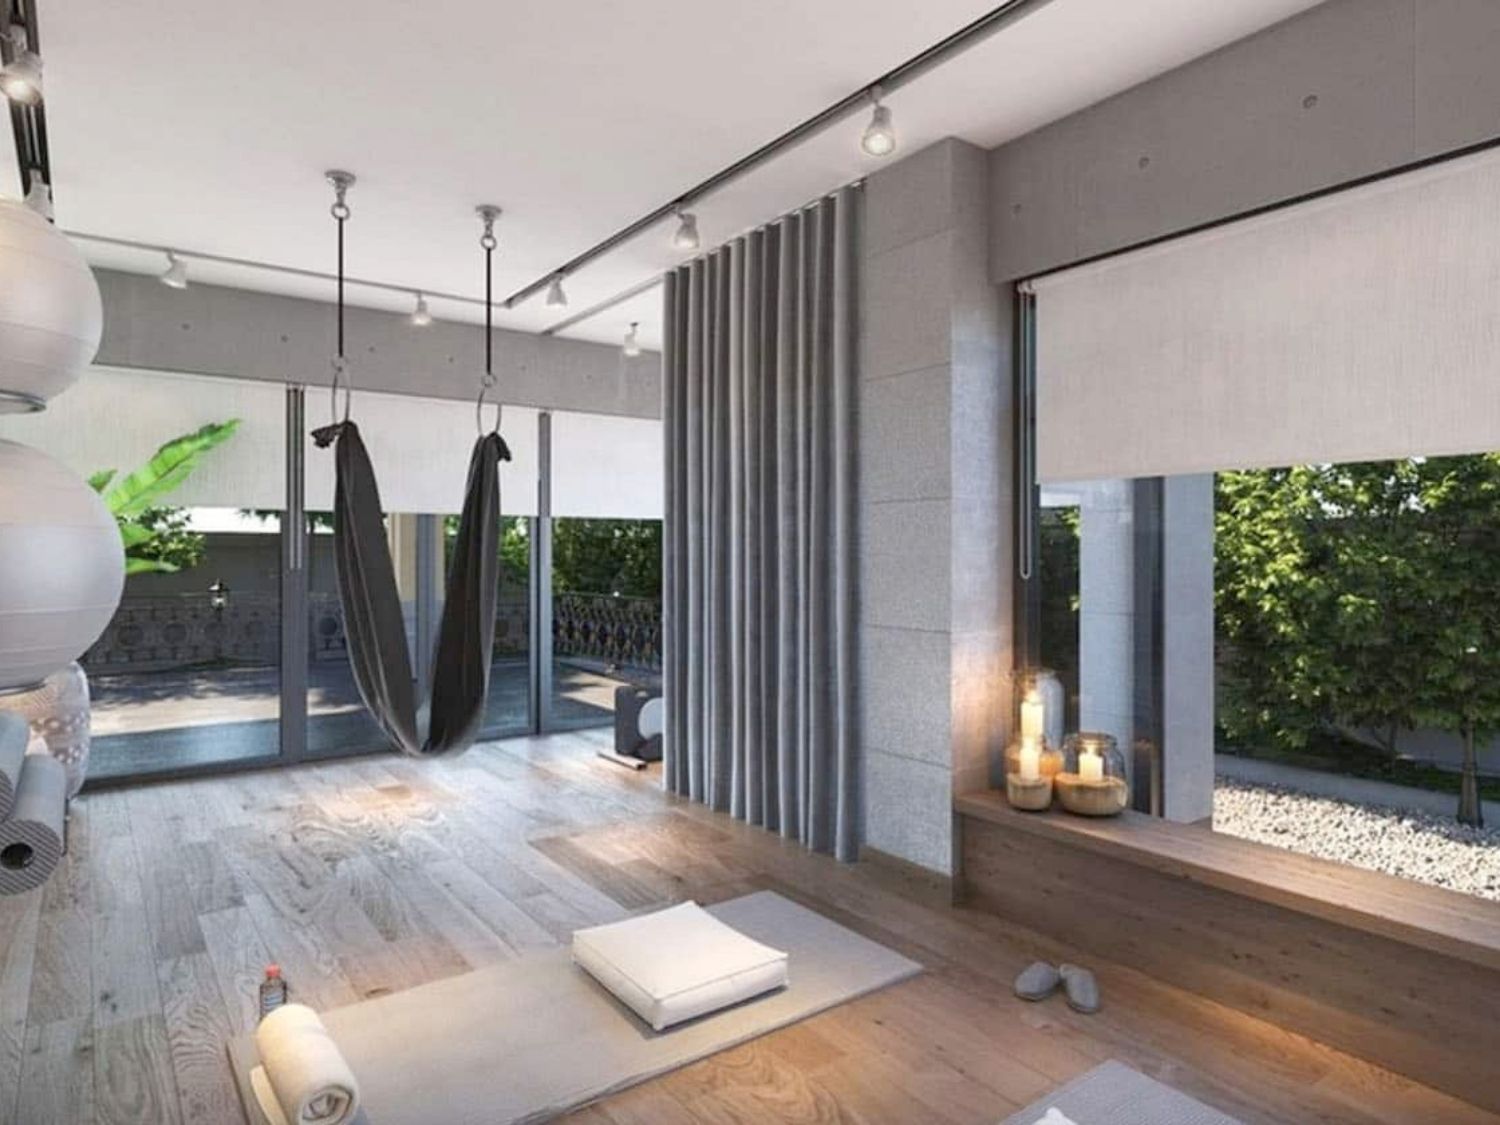 Luxury home yoga studio with natural line